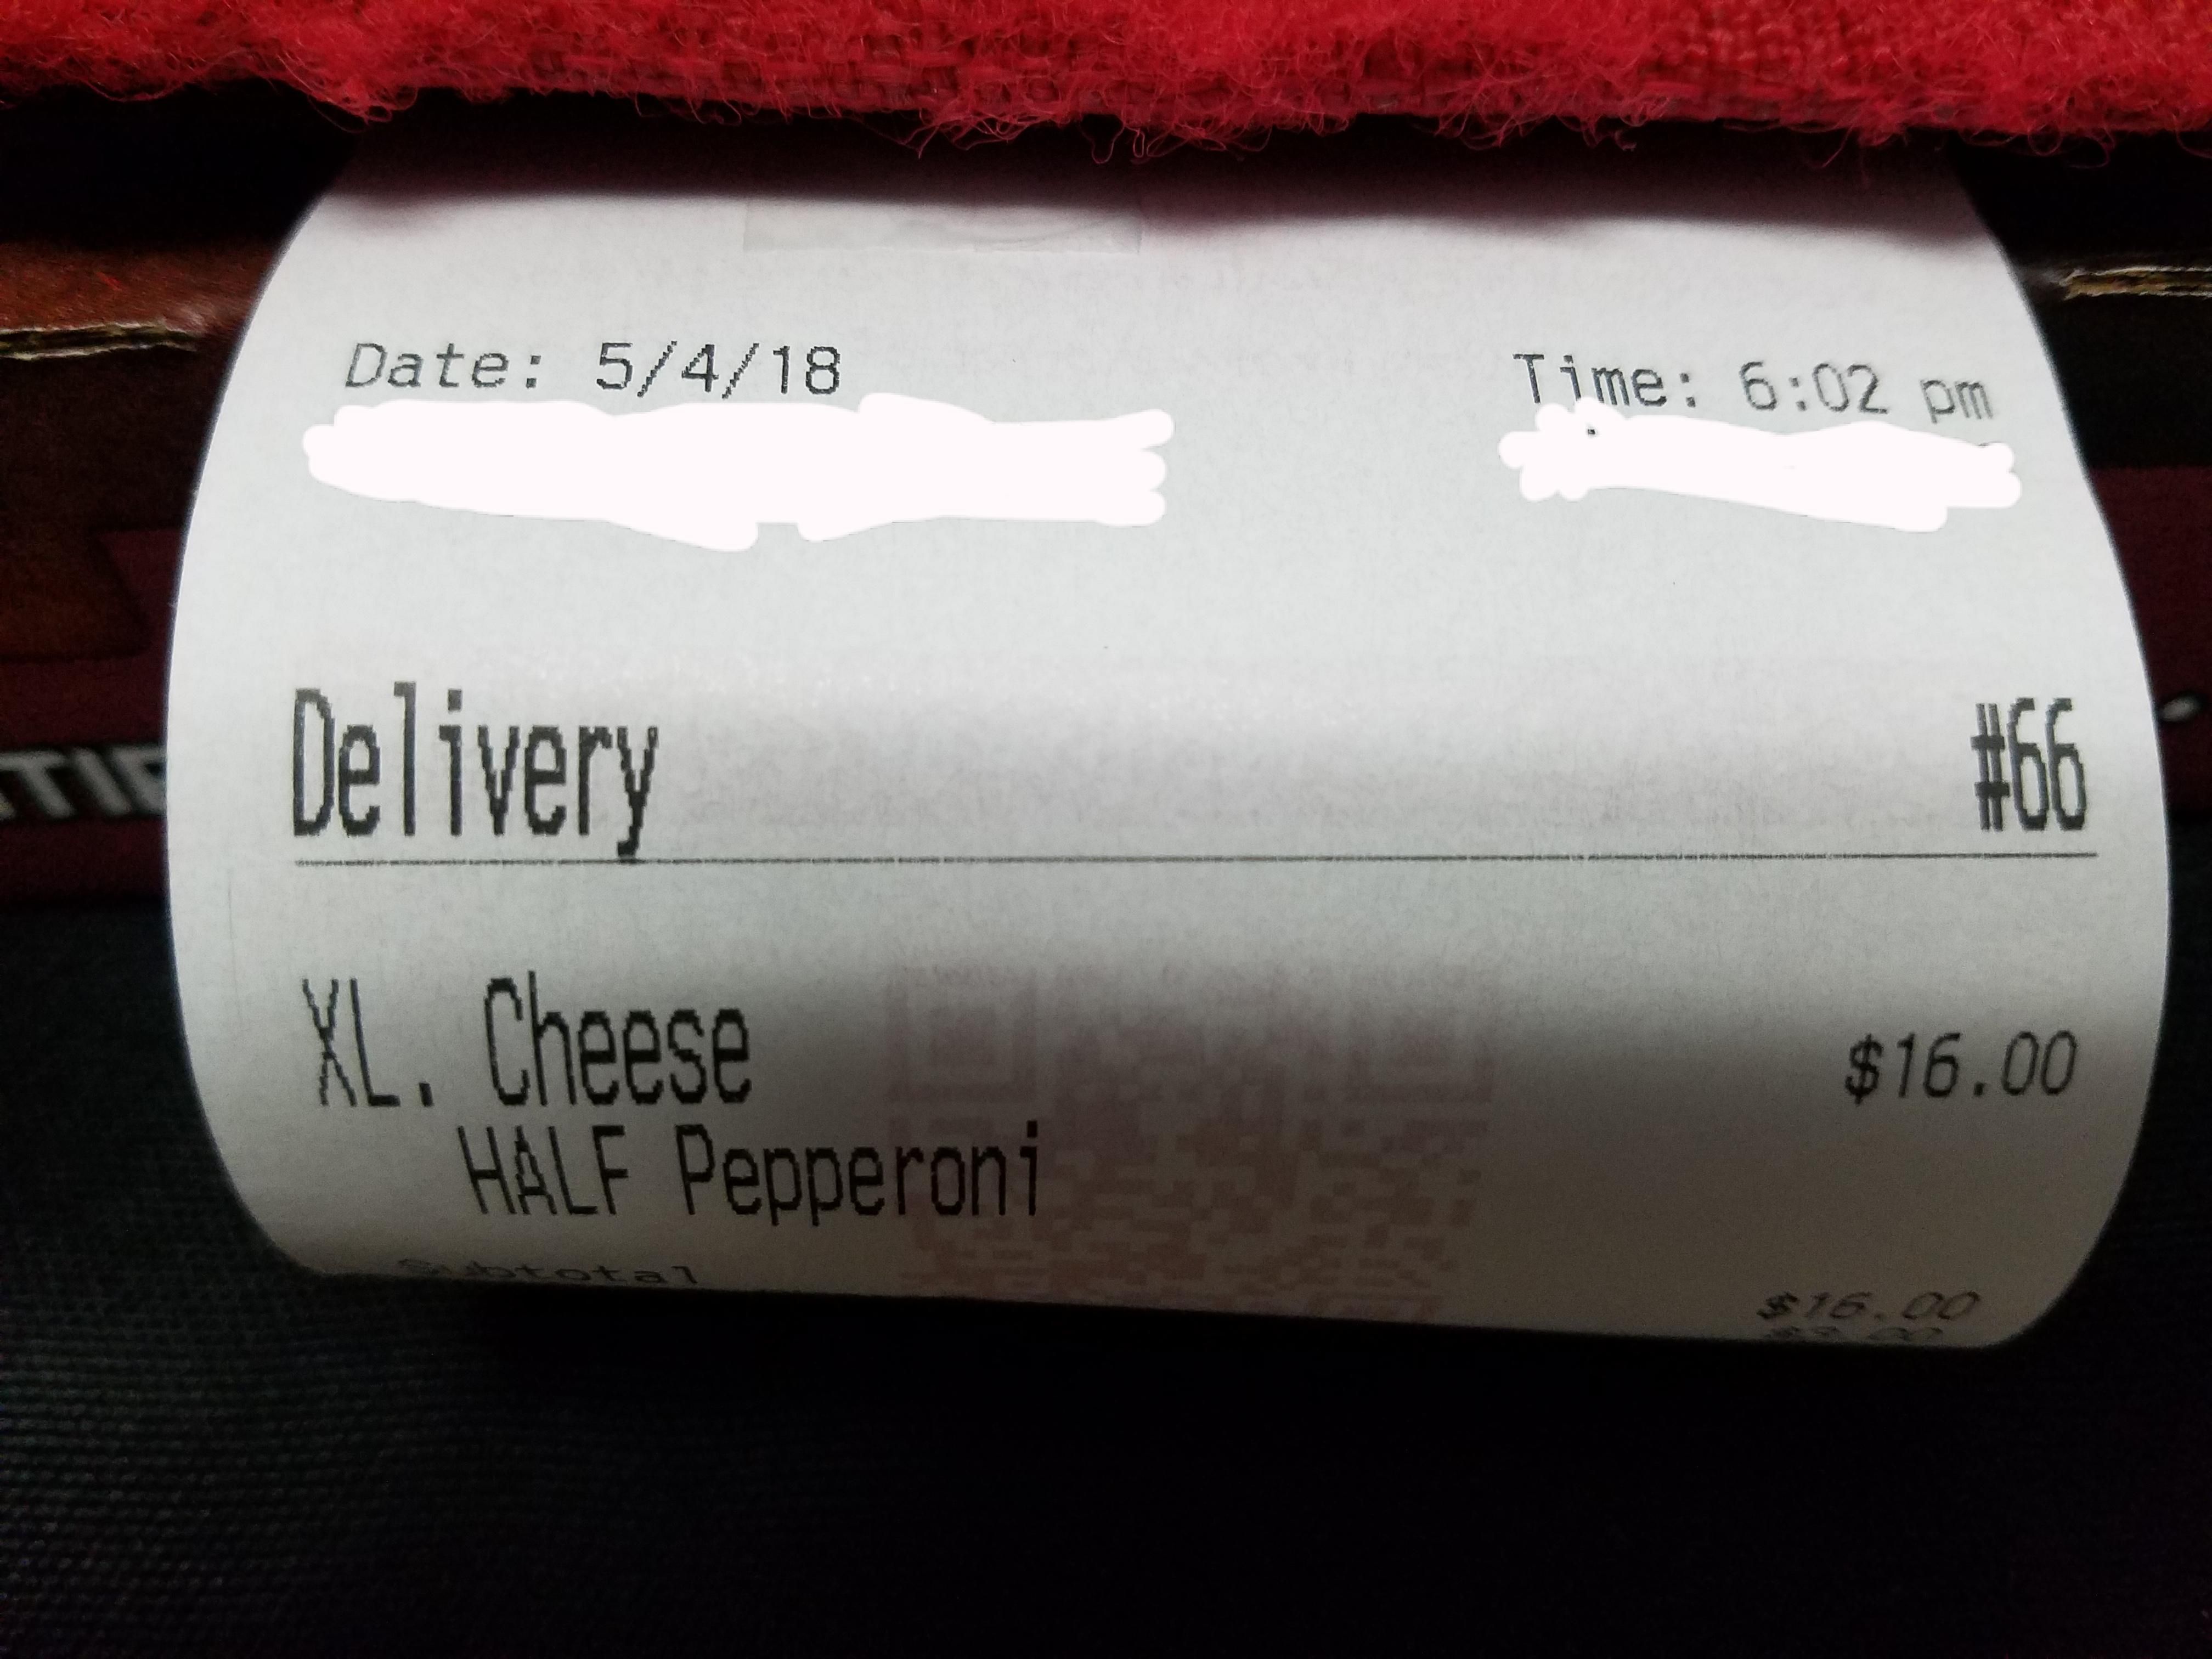 I'm a pizza delivery driver and I got to Execute Order 66 on May the 4th!